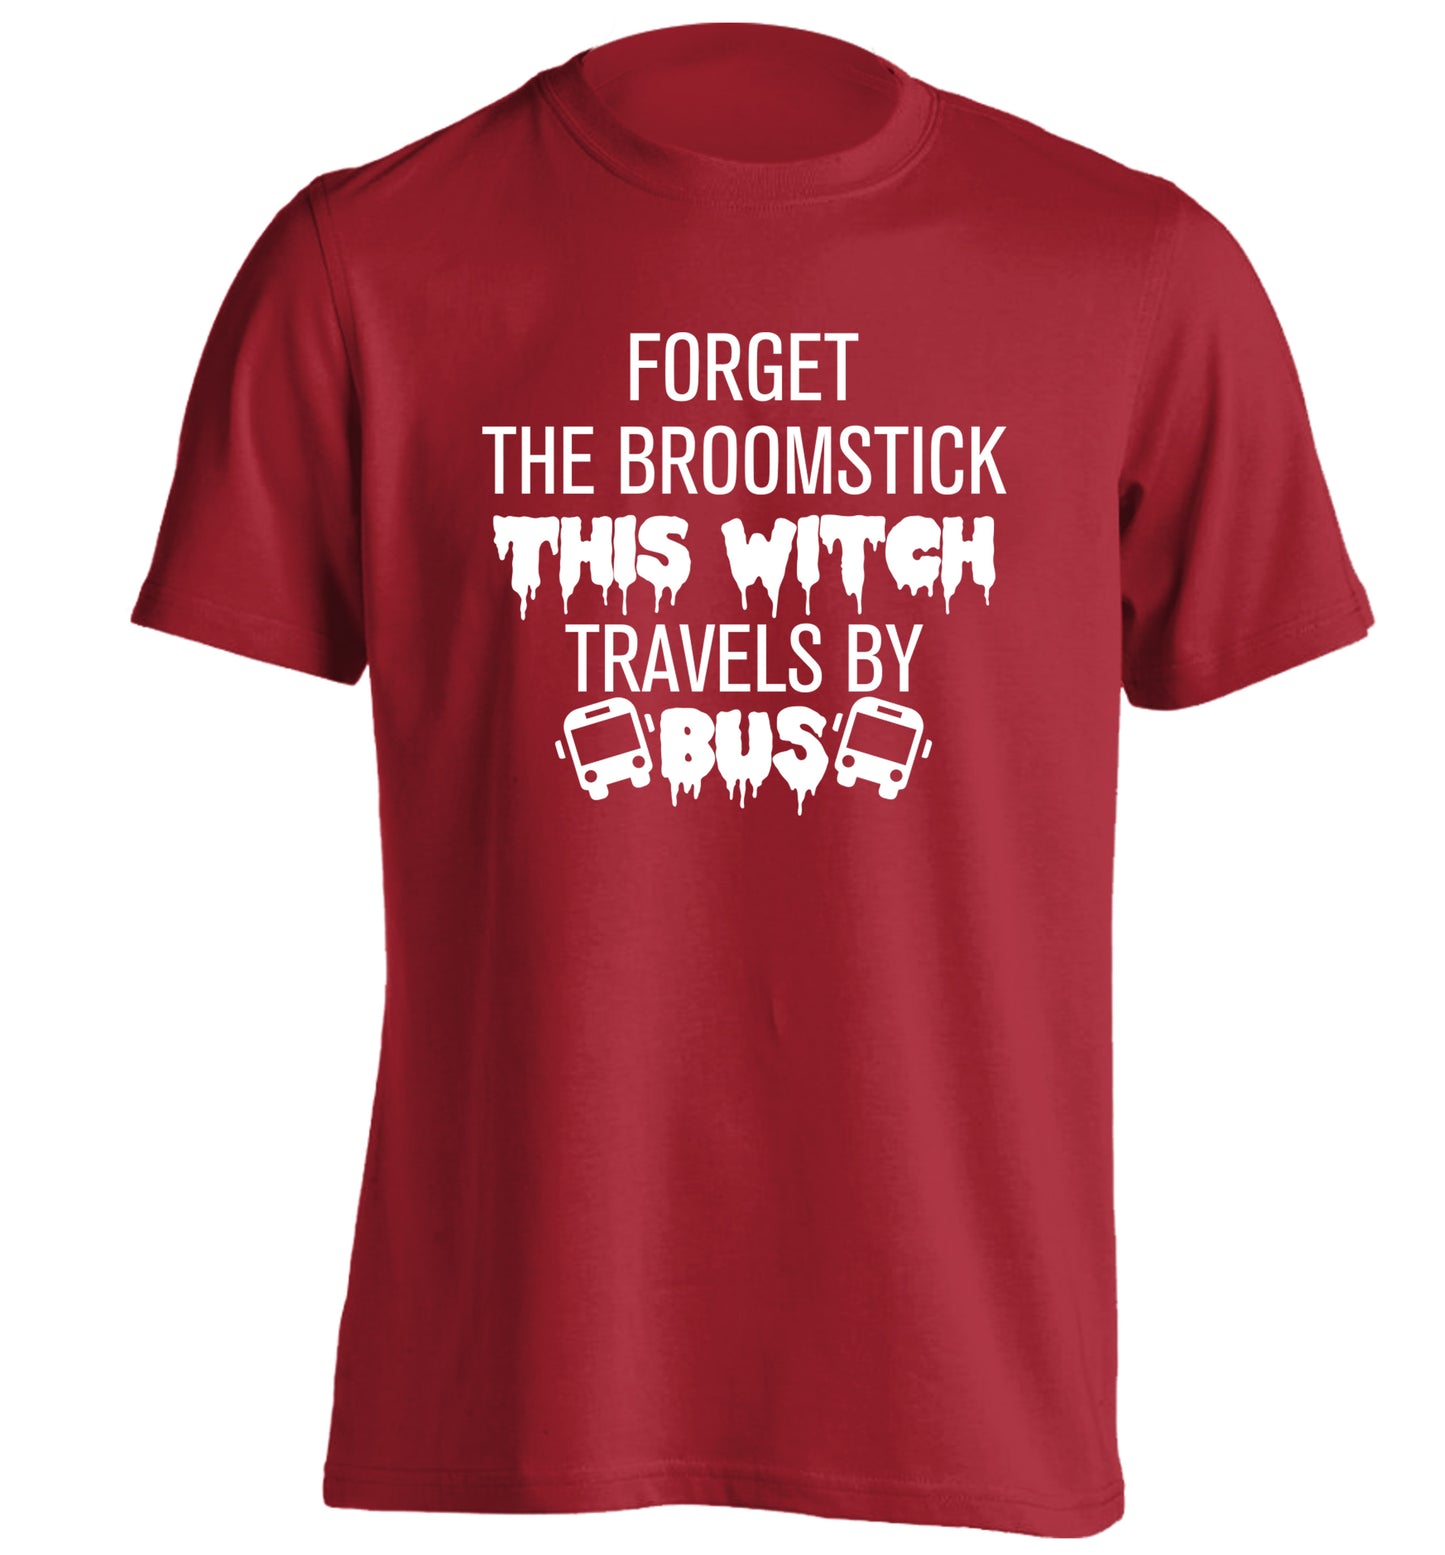 Forget the broomstick this witch travels by bus adults unisexred Tshirt 2XL